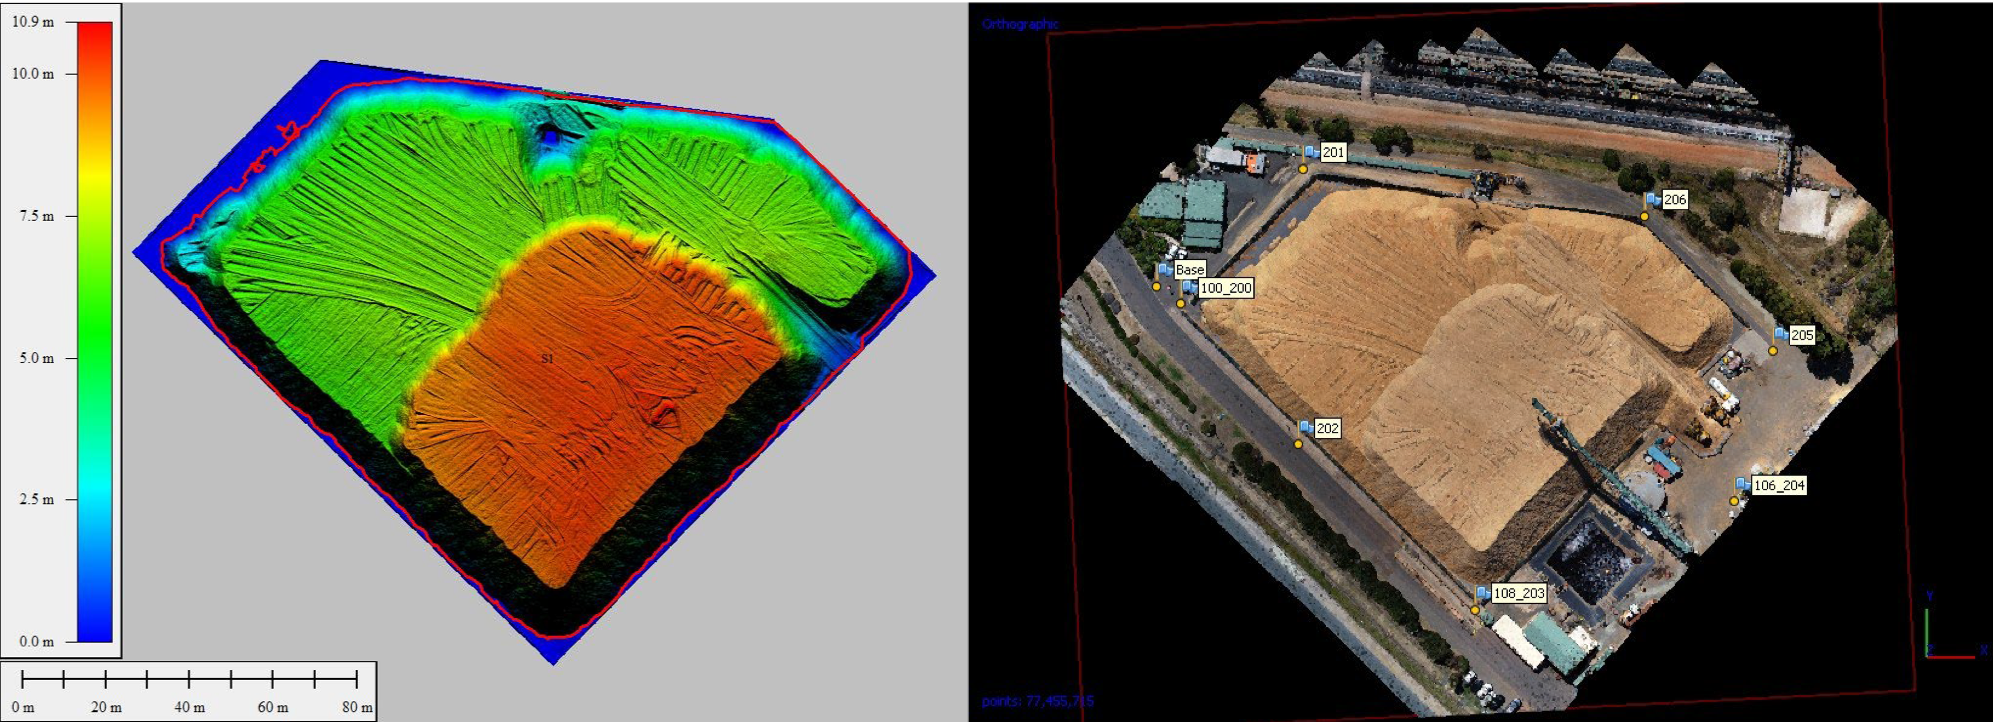 Major Wood Chip Exporter Now Prefers Drones to Calculate Stockpile Volumes Rather Than Conventional Survey Methods